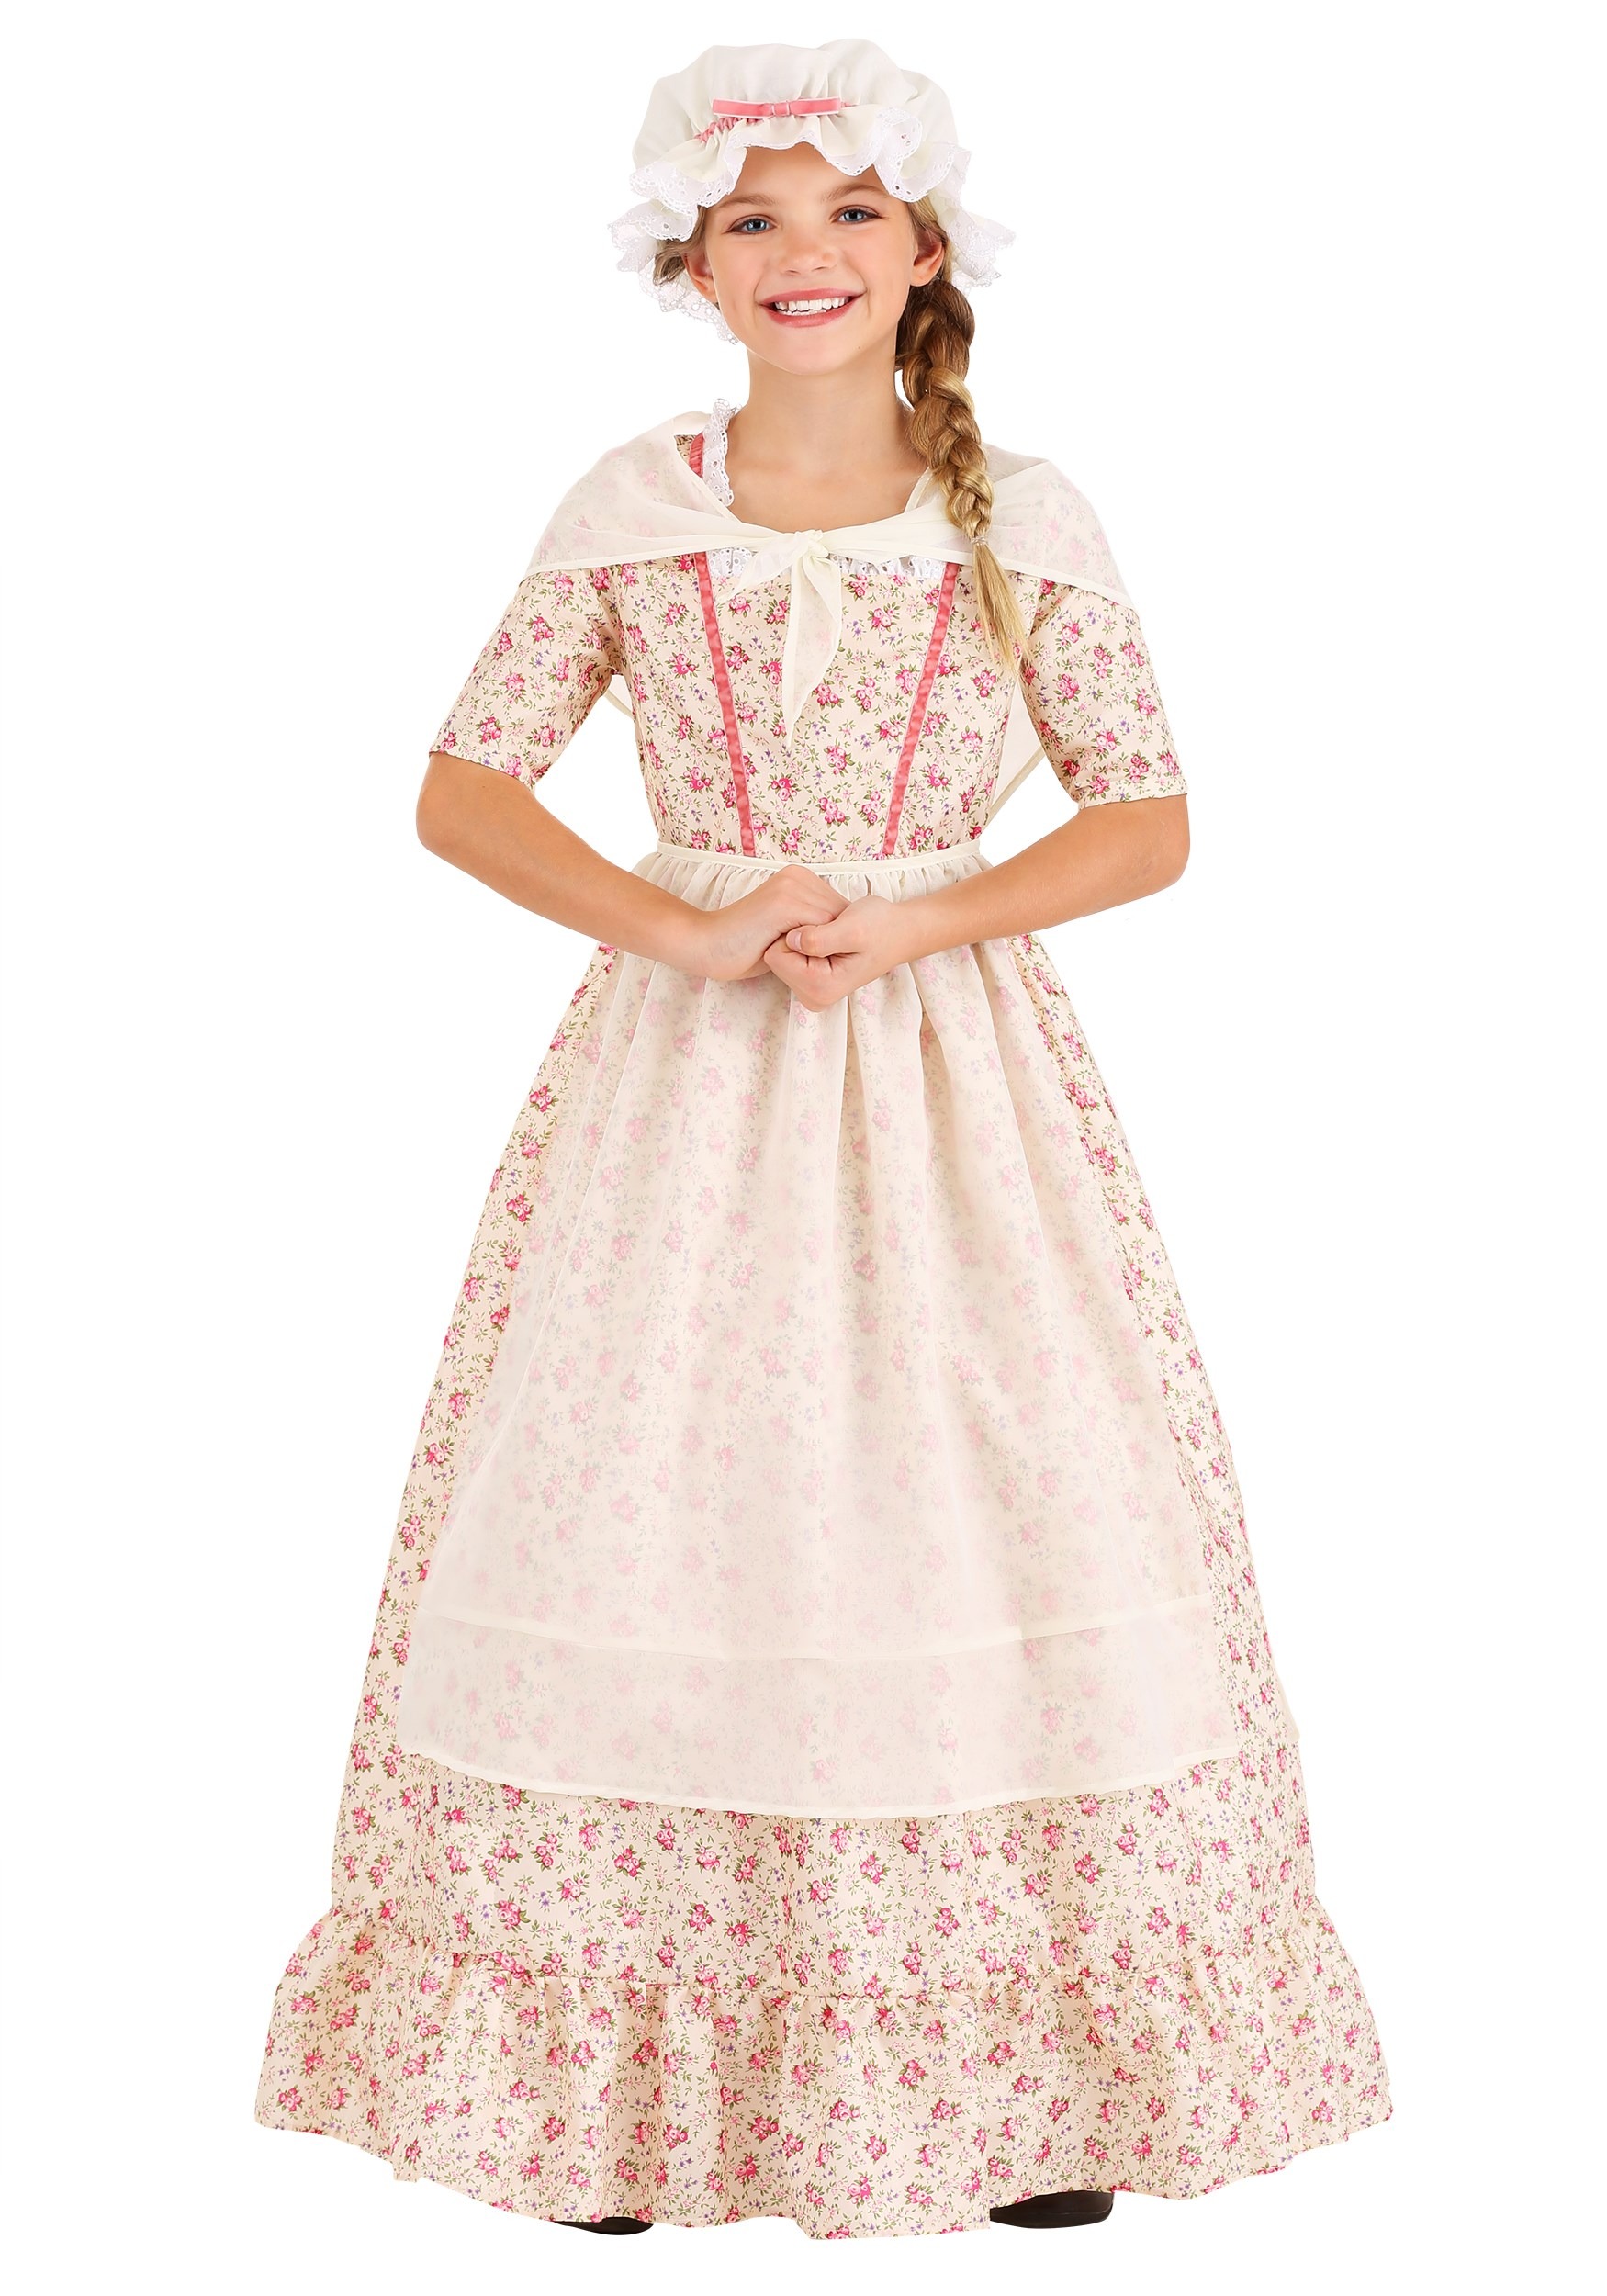 Photos - Fancy Dress FUN Costumes Colonial Girl Costume Dress for Kids | Historical Costumes Pi